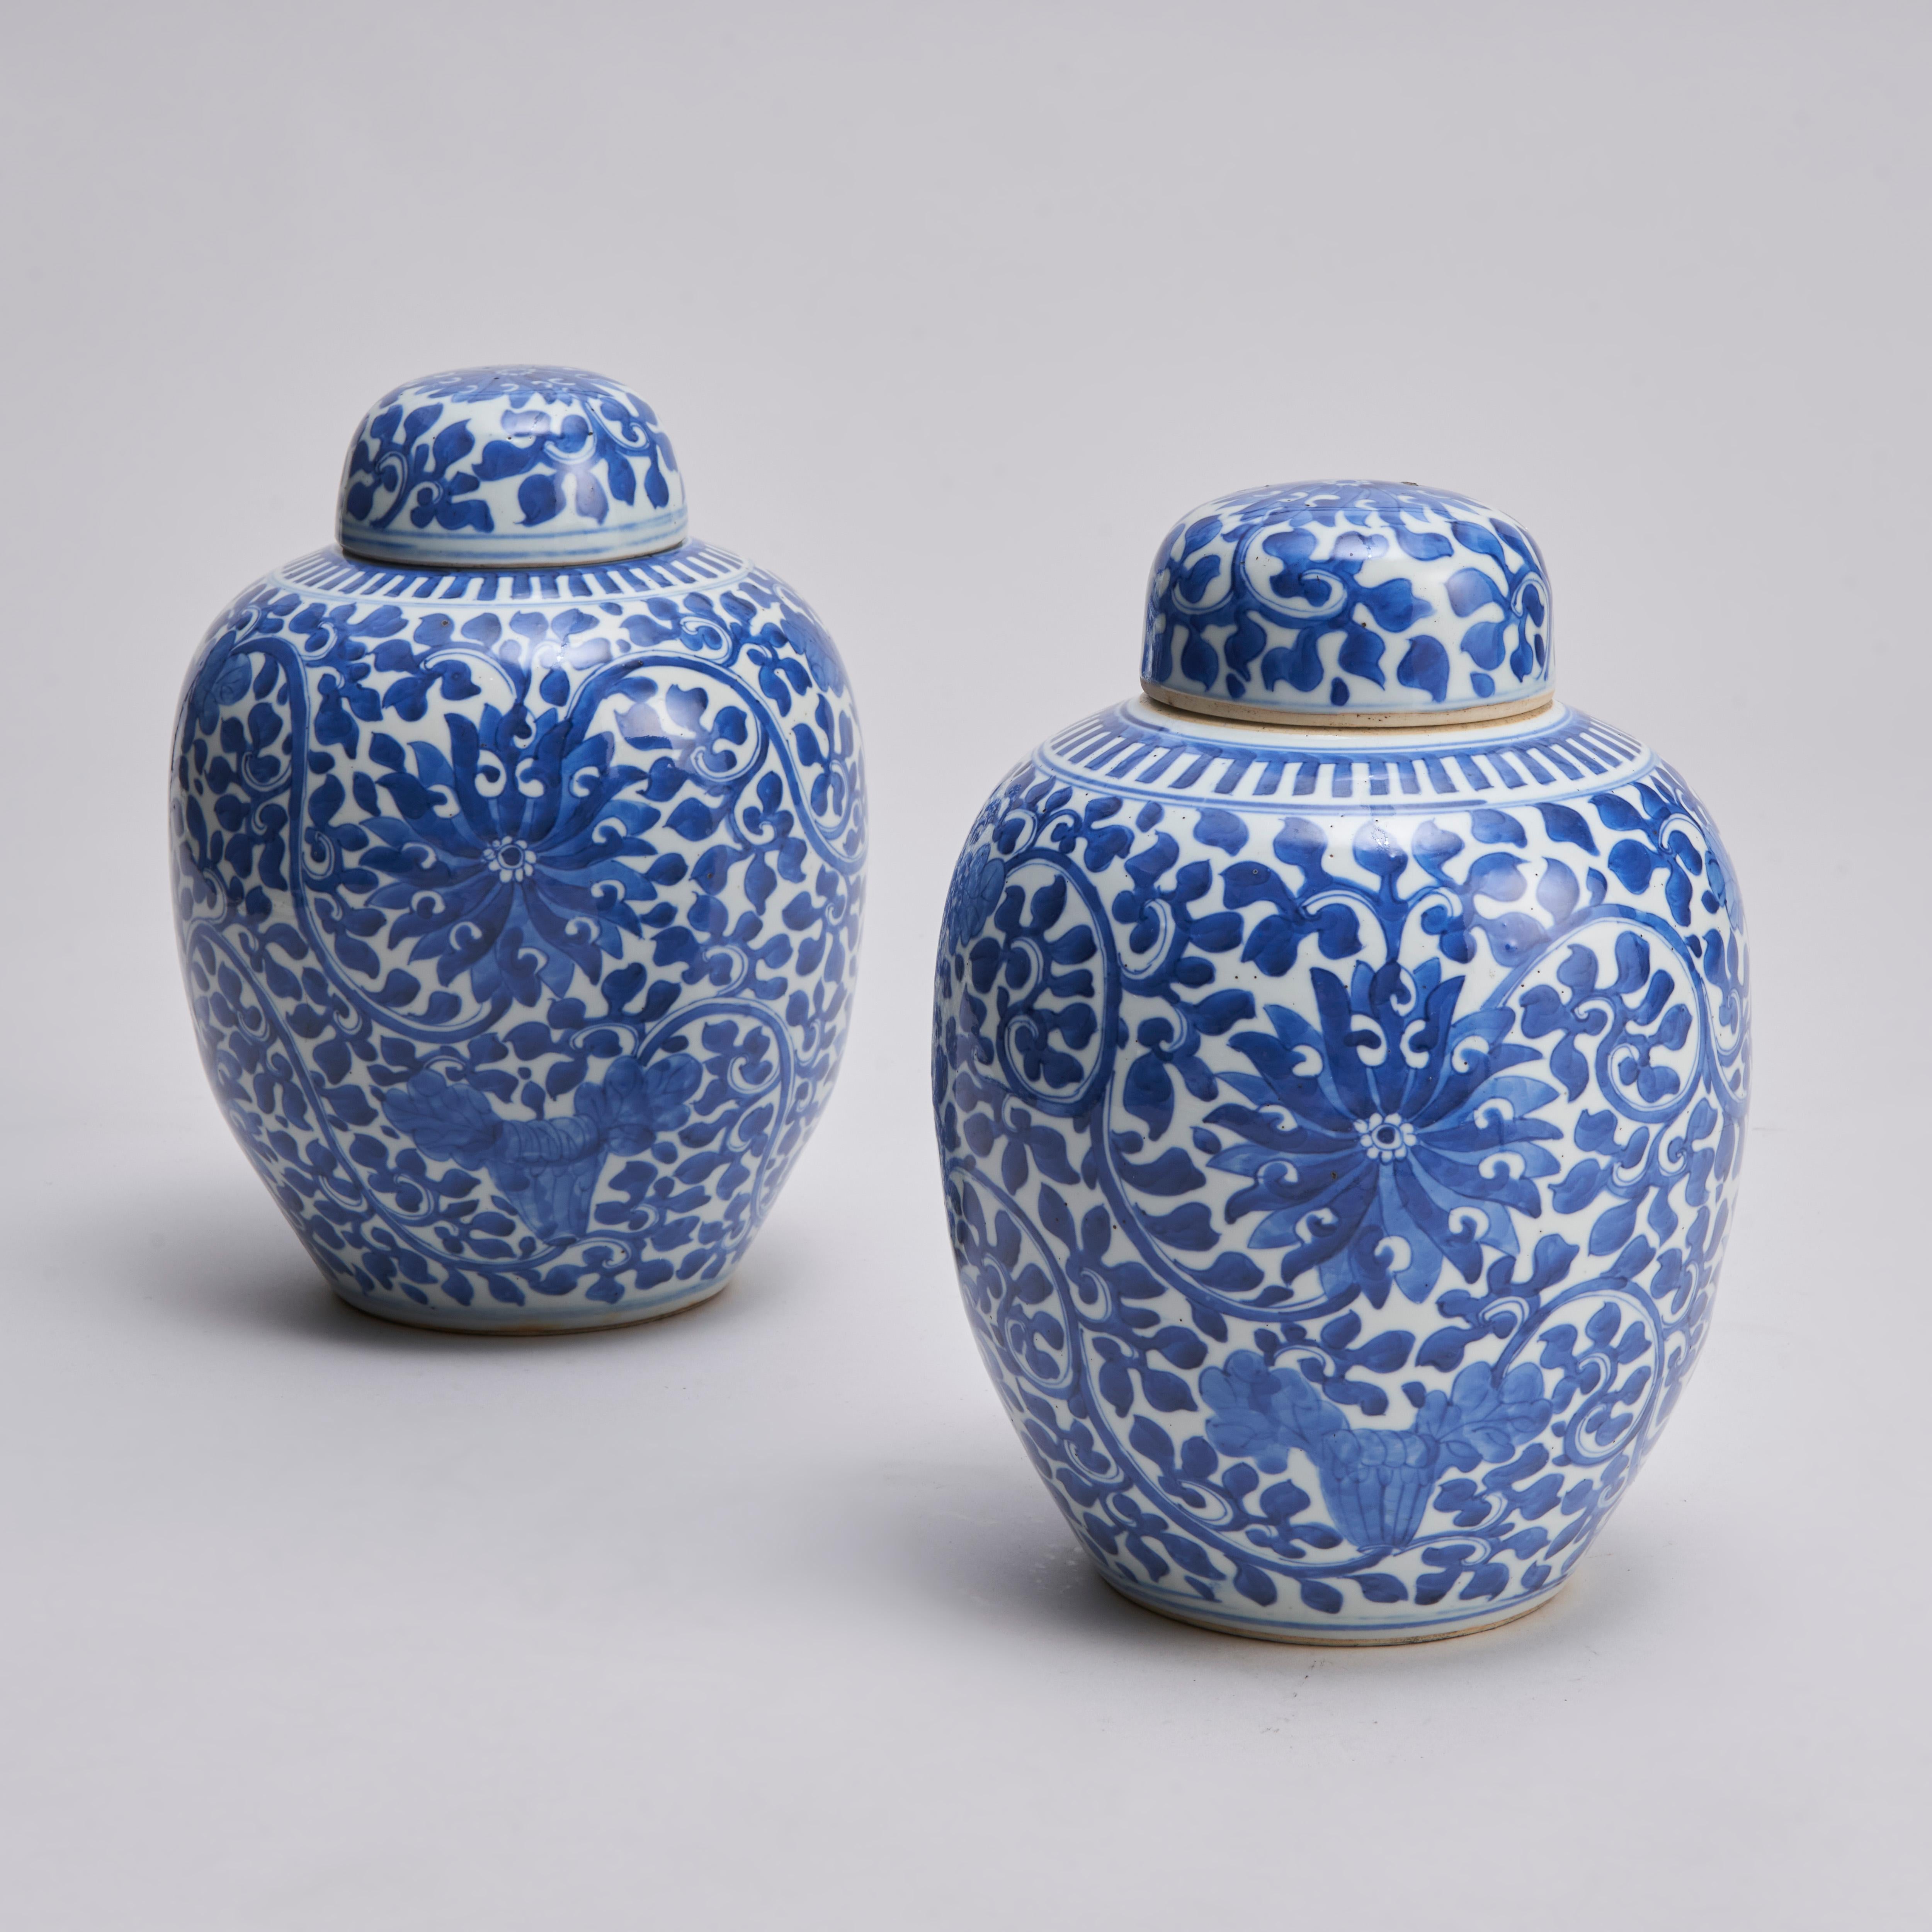 A pair of covered porcelain jars with blue and white decoration For Sale 1